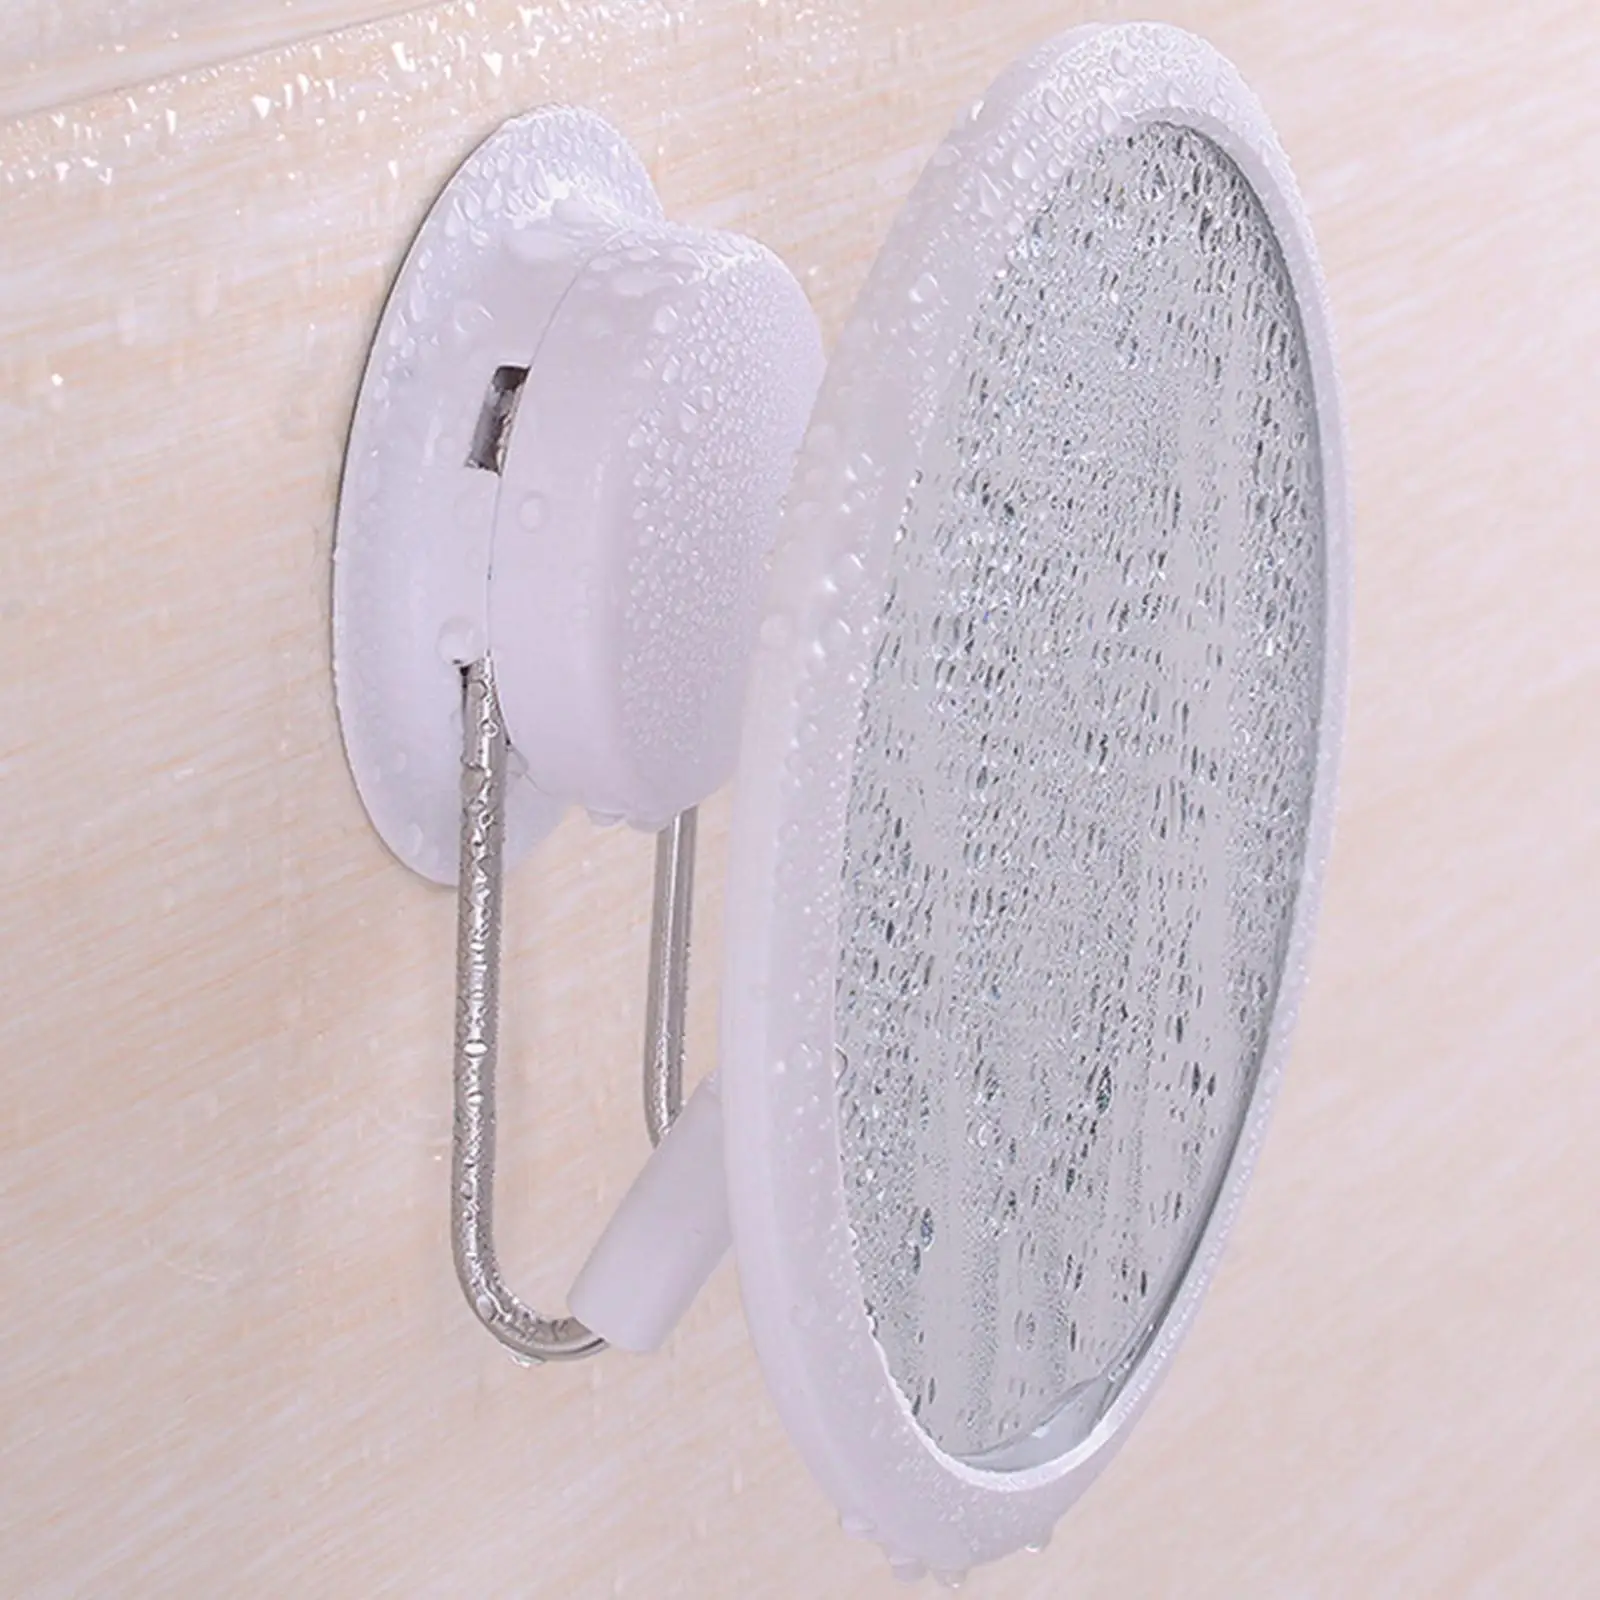 Wall Suction Bathroom Mirror Foldable Rotating Without Traces Waterproof No Drills Easy to Clean Mirror Plastic